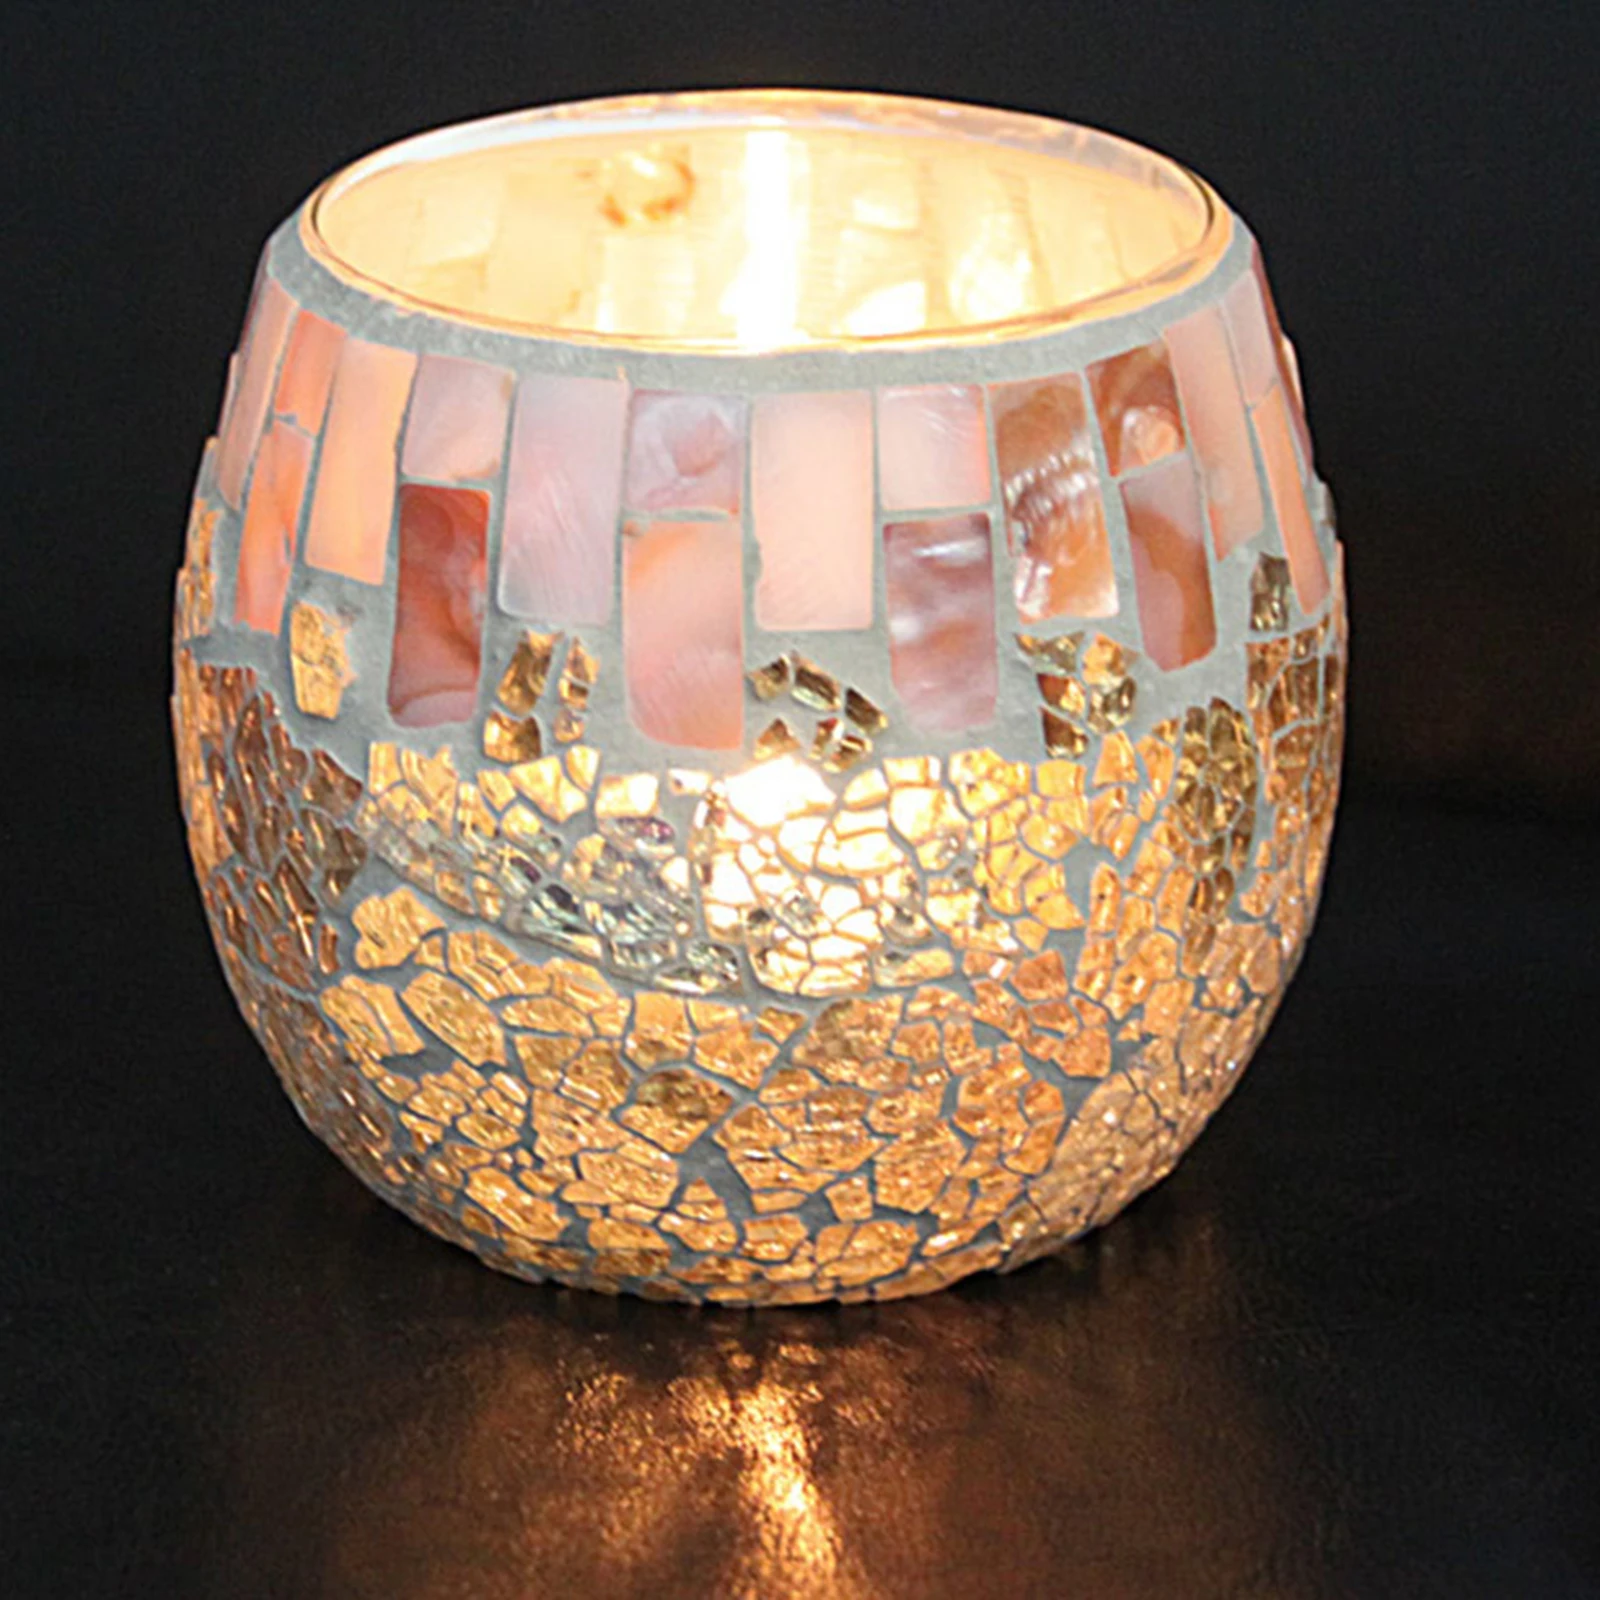 Mosaic Glass Candle Holders, Tea Light Holders Handmade Artwork Gifts for Home Decor Party Decorations